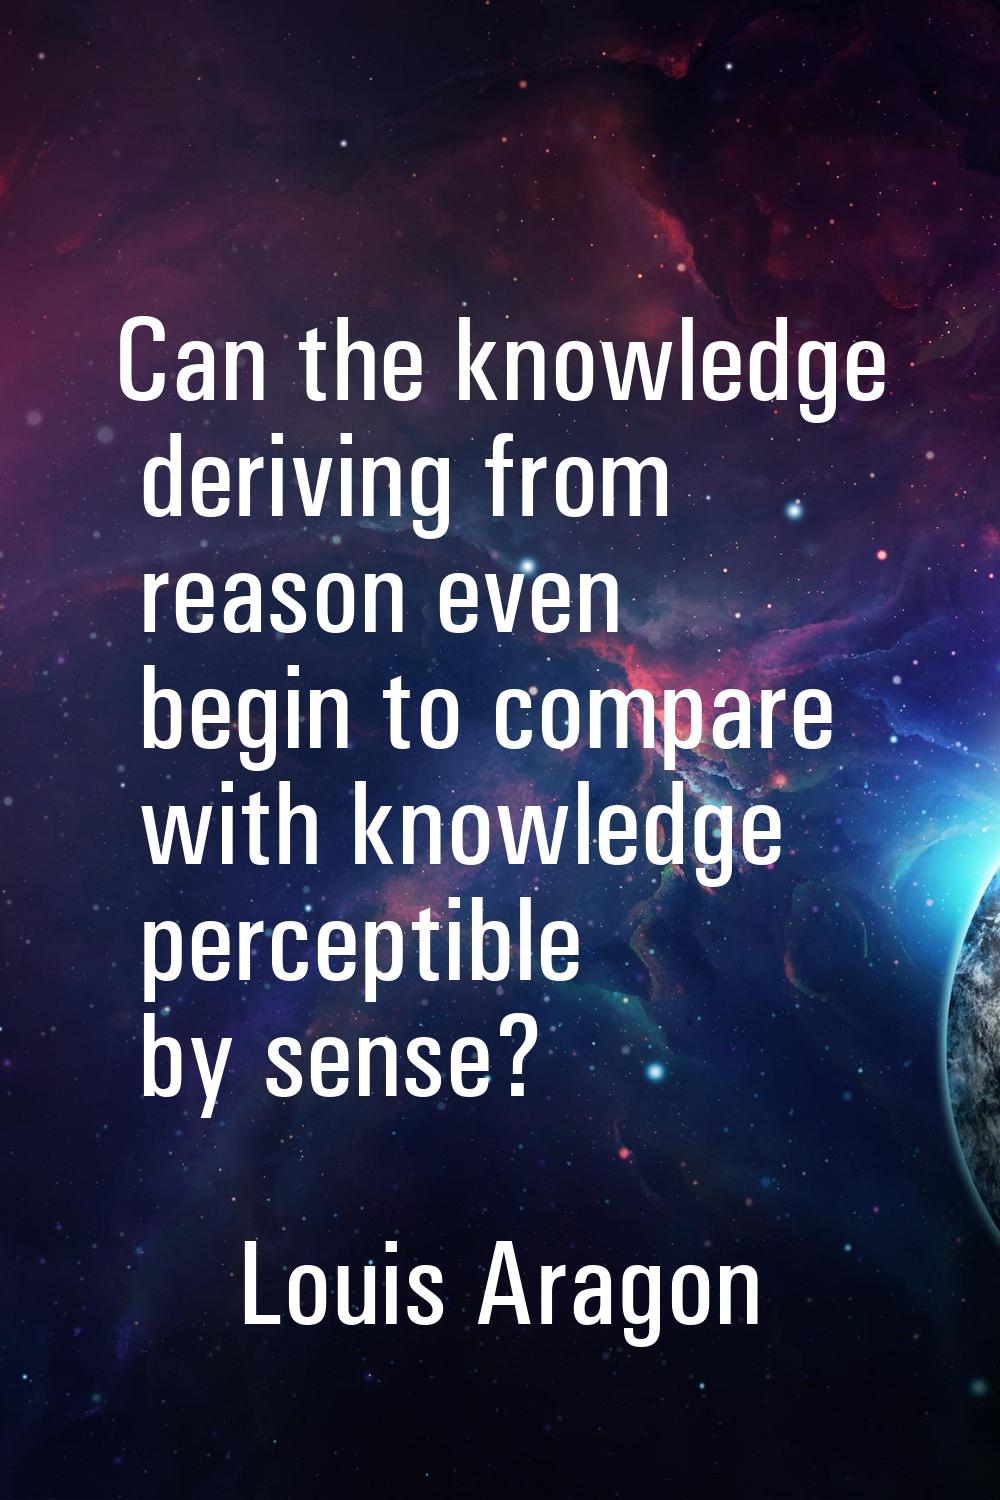 Can the knowledge deriving from reason even begin to compare with knowledge perceptible by sense?